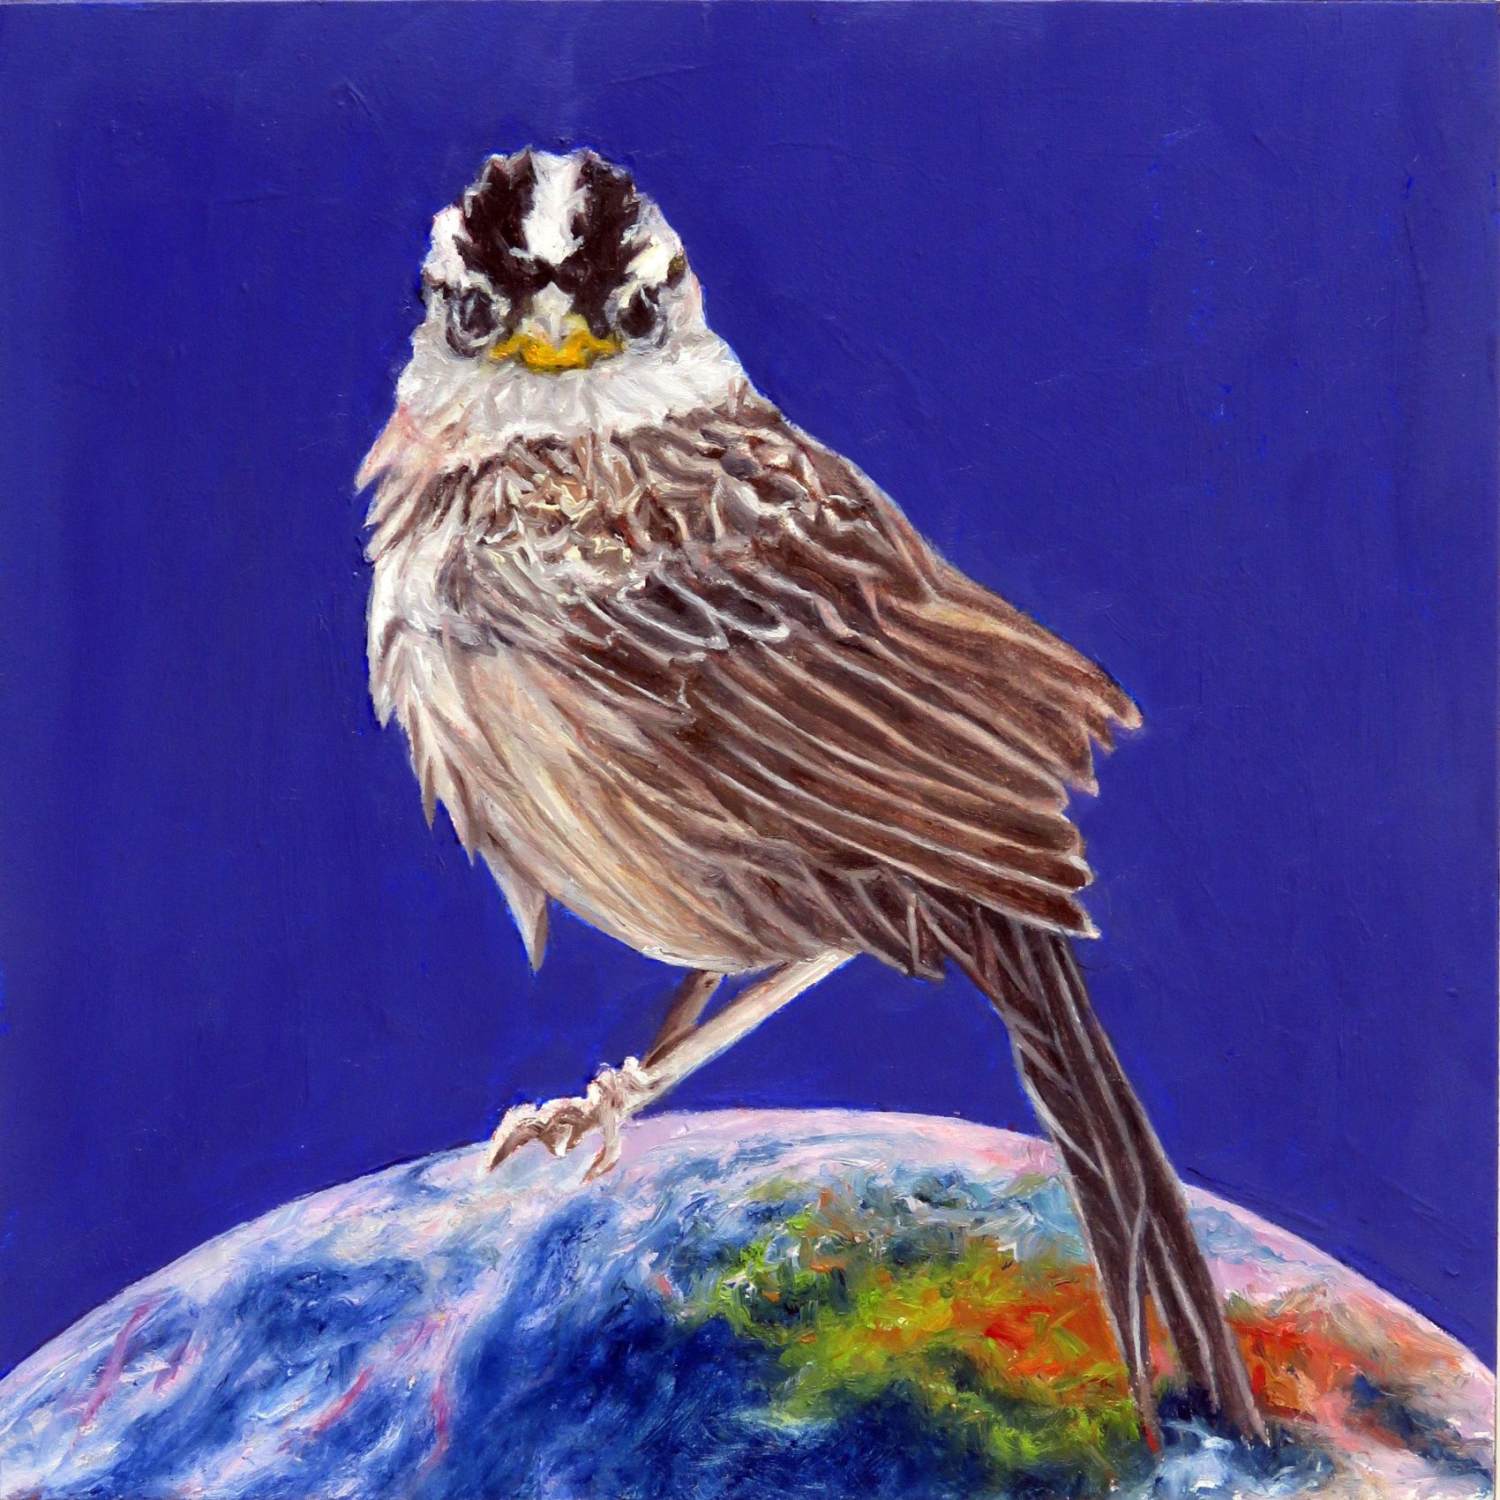 laureen-marchand-white-crown-bird-oil-painting-climate-change-art-online-gallery